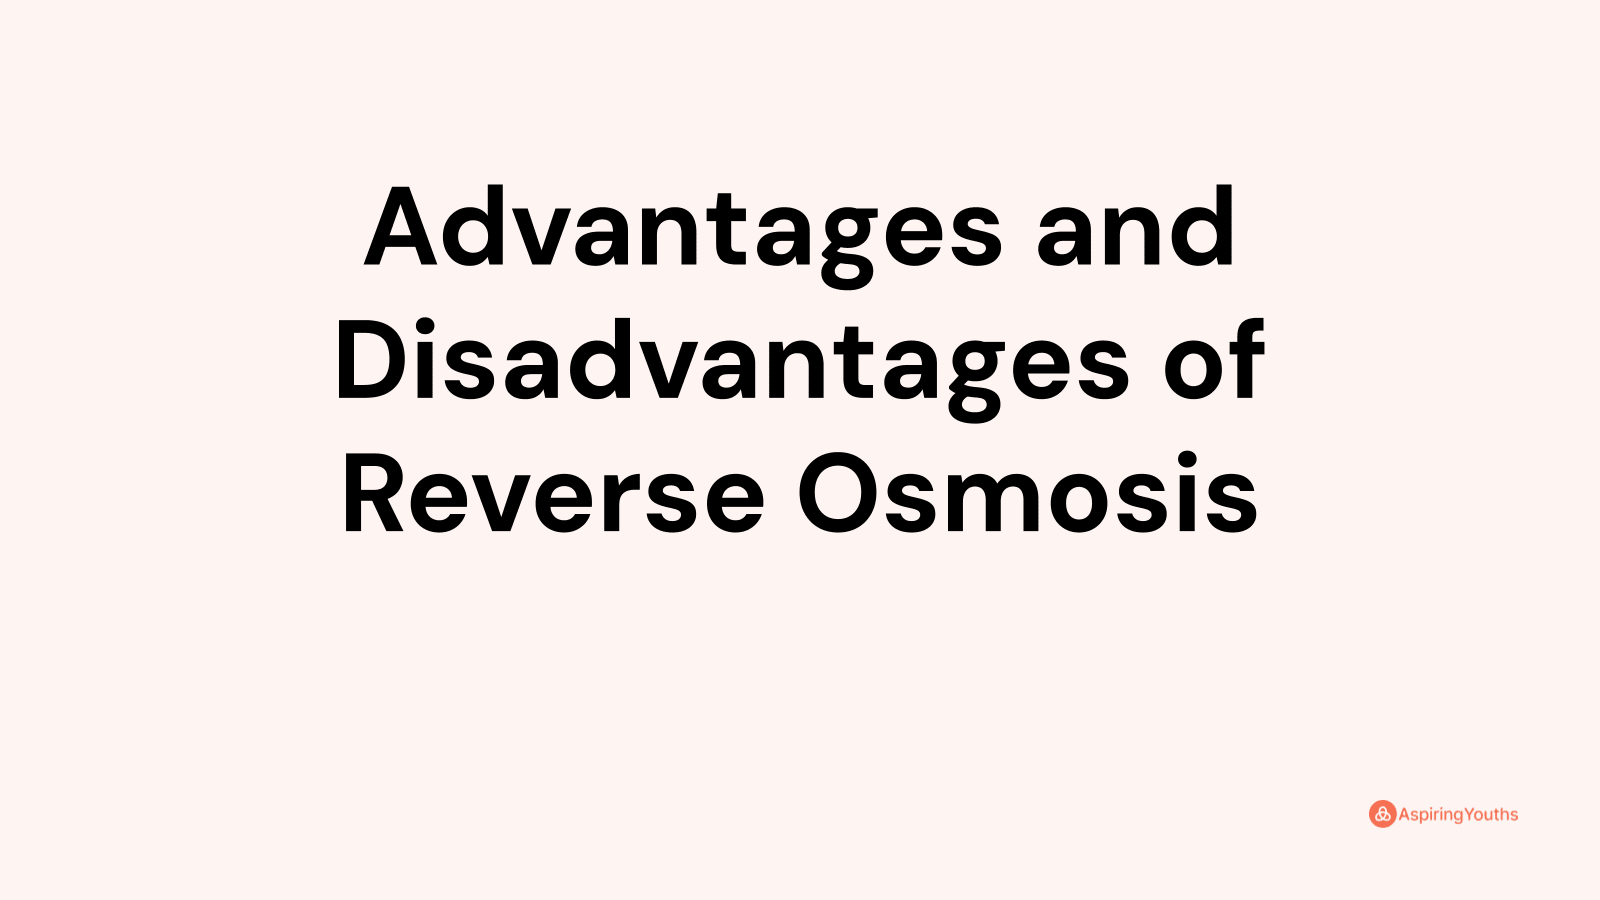 Advantages and disadvantages of Reverse Osmosis